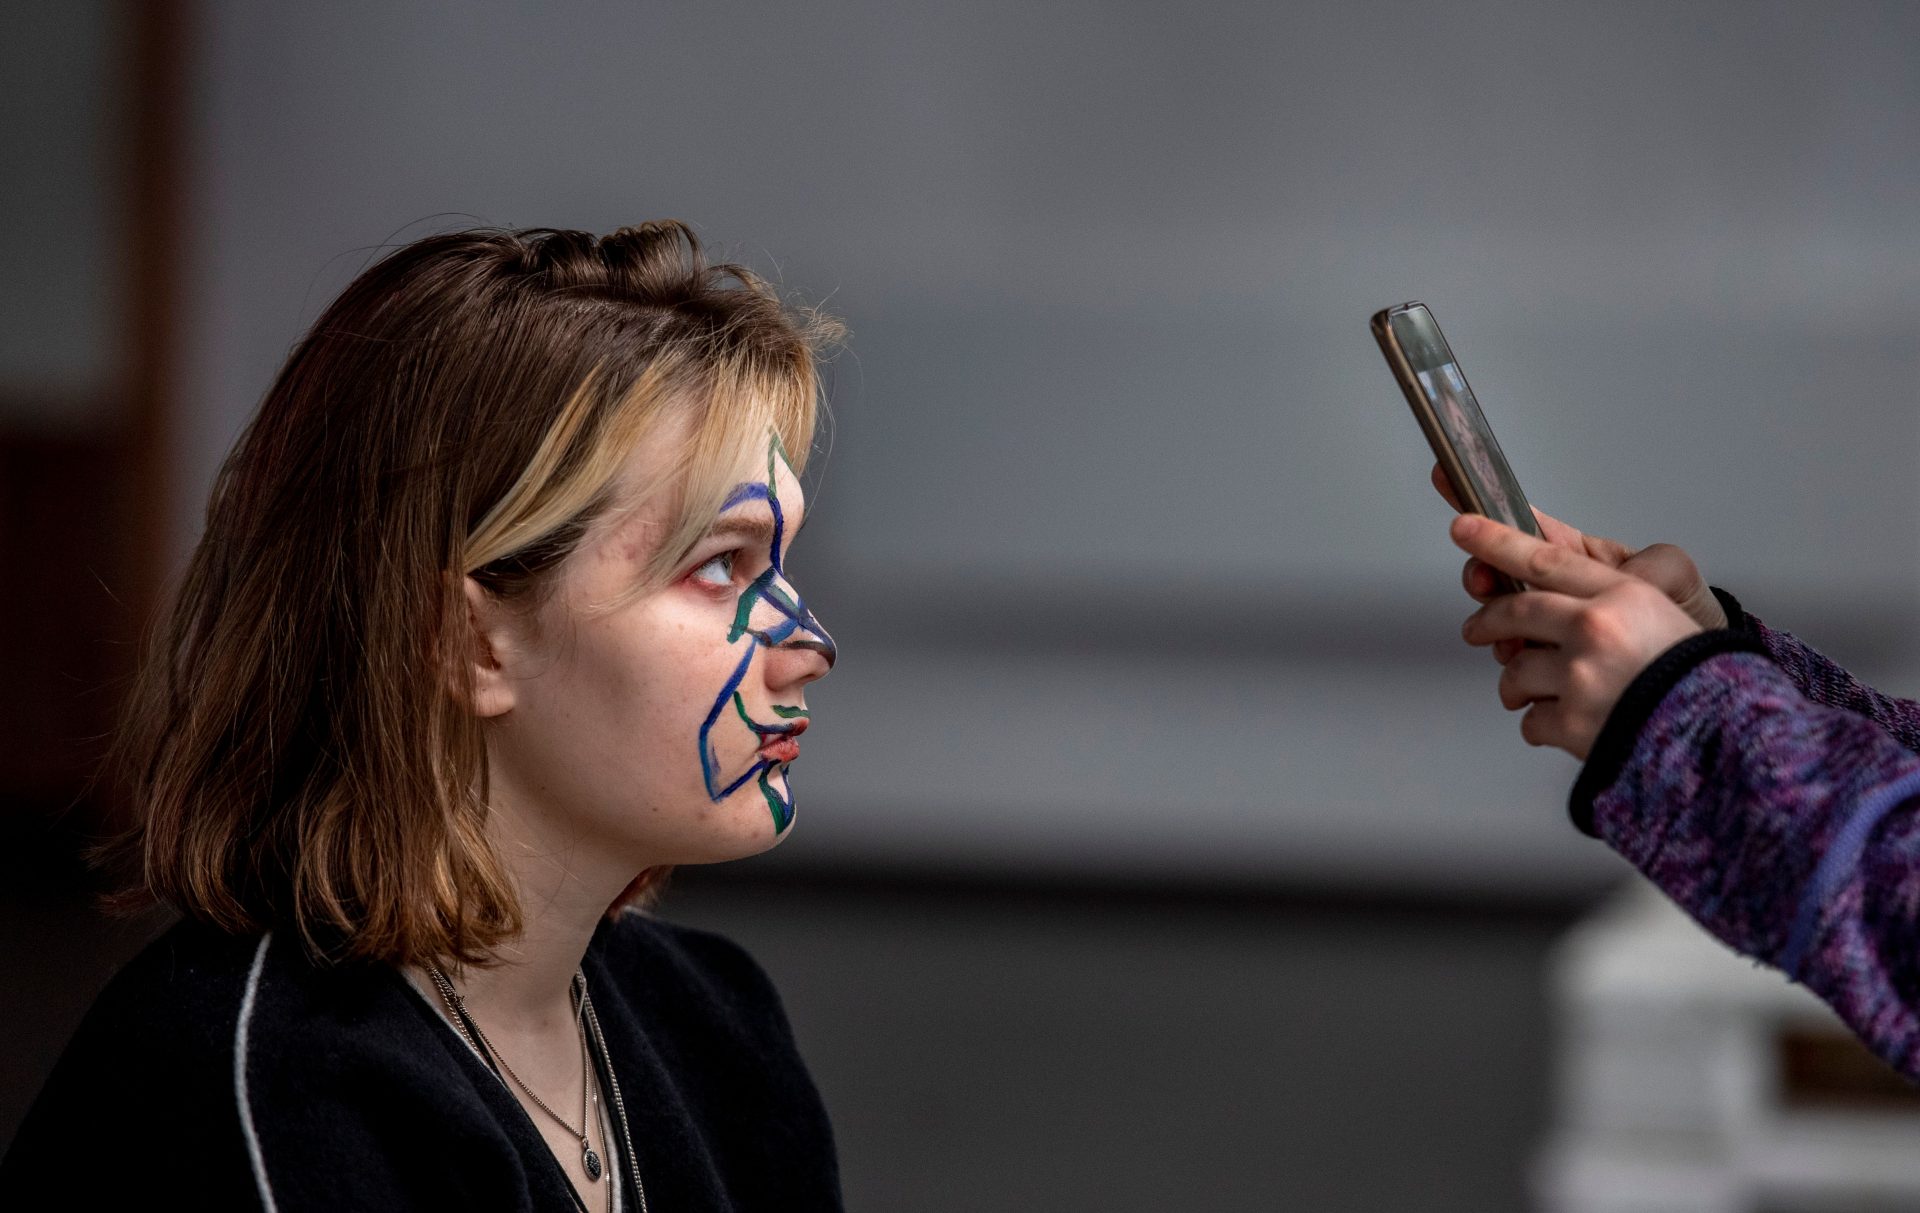 Researchers Defeated Superior Facial Recognition Tech The utilization of Makeup